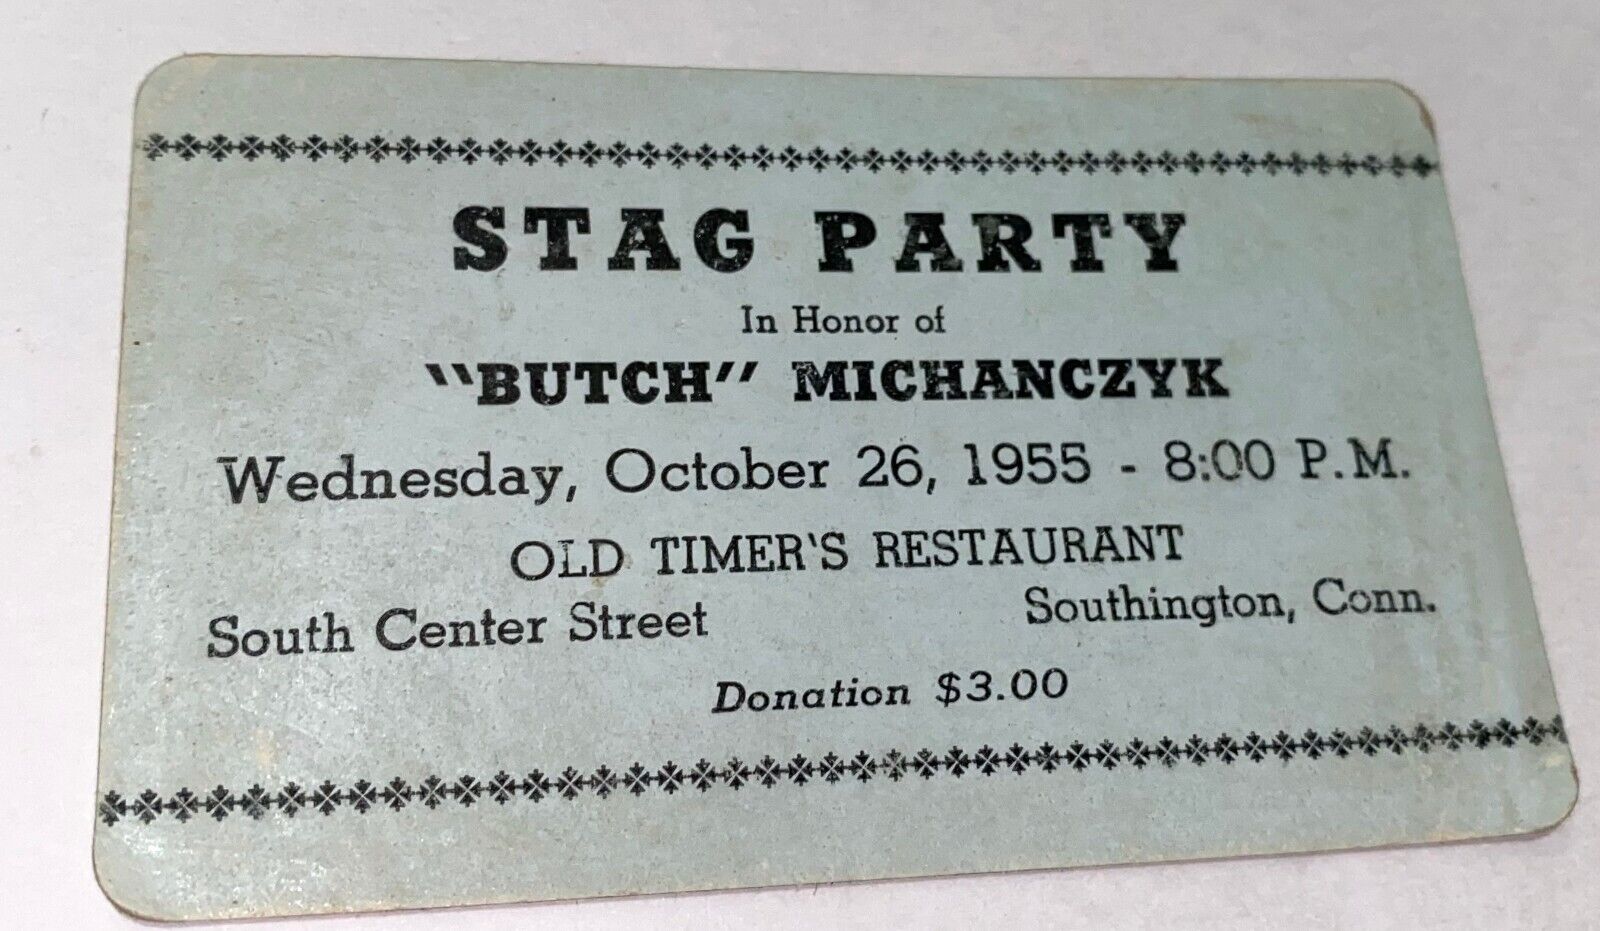 Vintage Stag Party Butch Michanczyk Southington CT Old Timers Restaurant Card